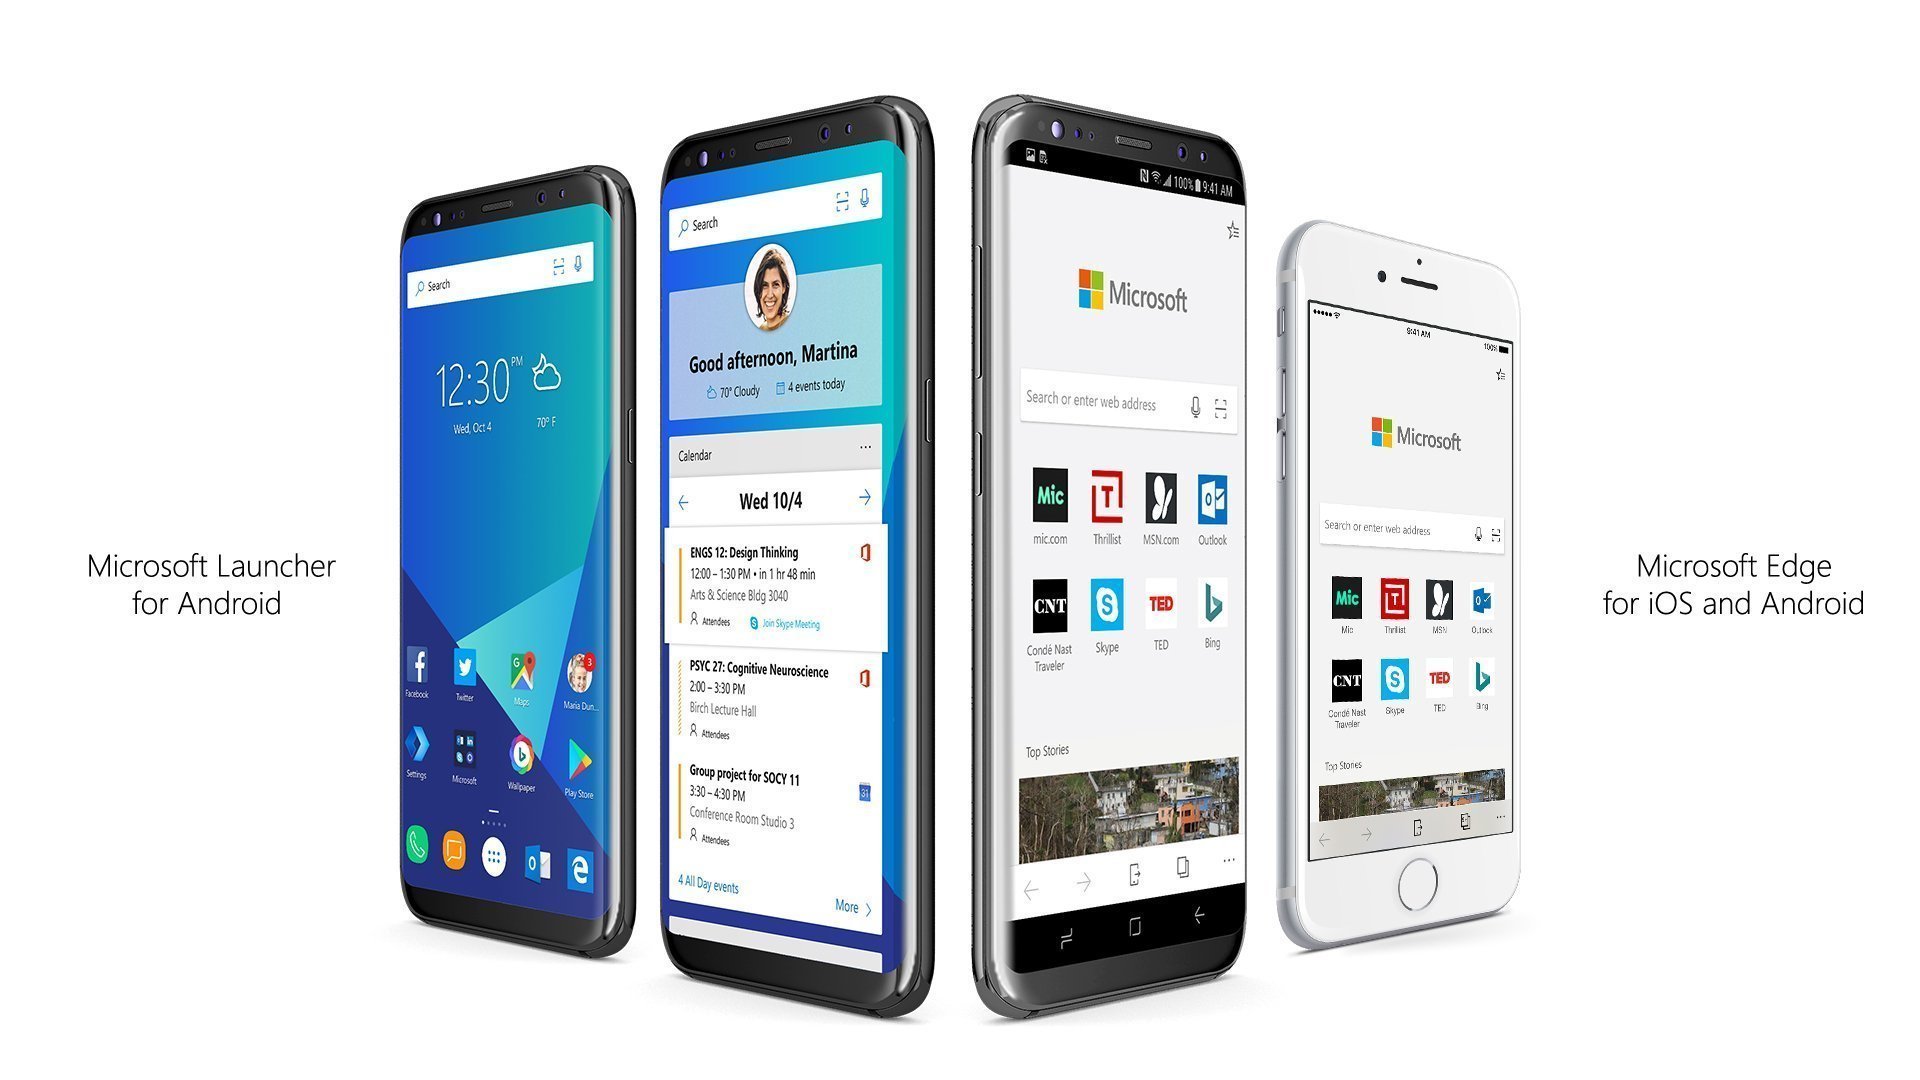 Microsoft Launcher app 4.12.0.44682 version for Android - August 1 caaf609f6273fcc3e9545708498dcded.jpg